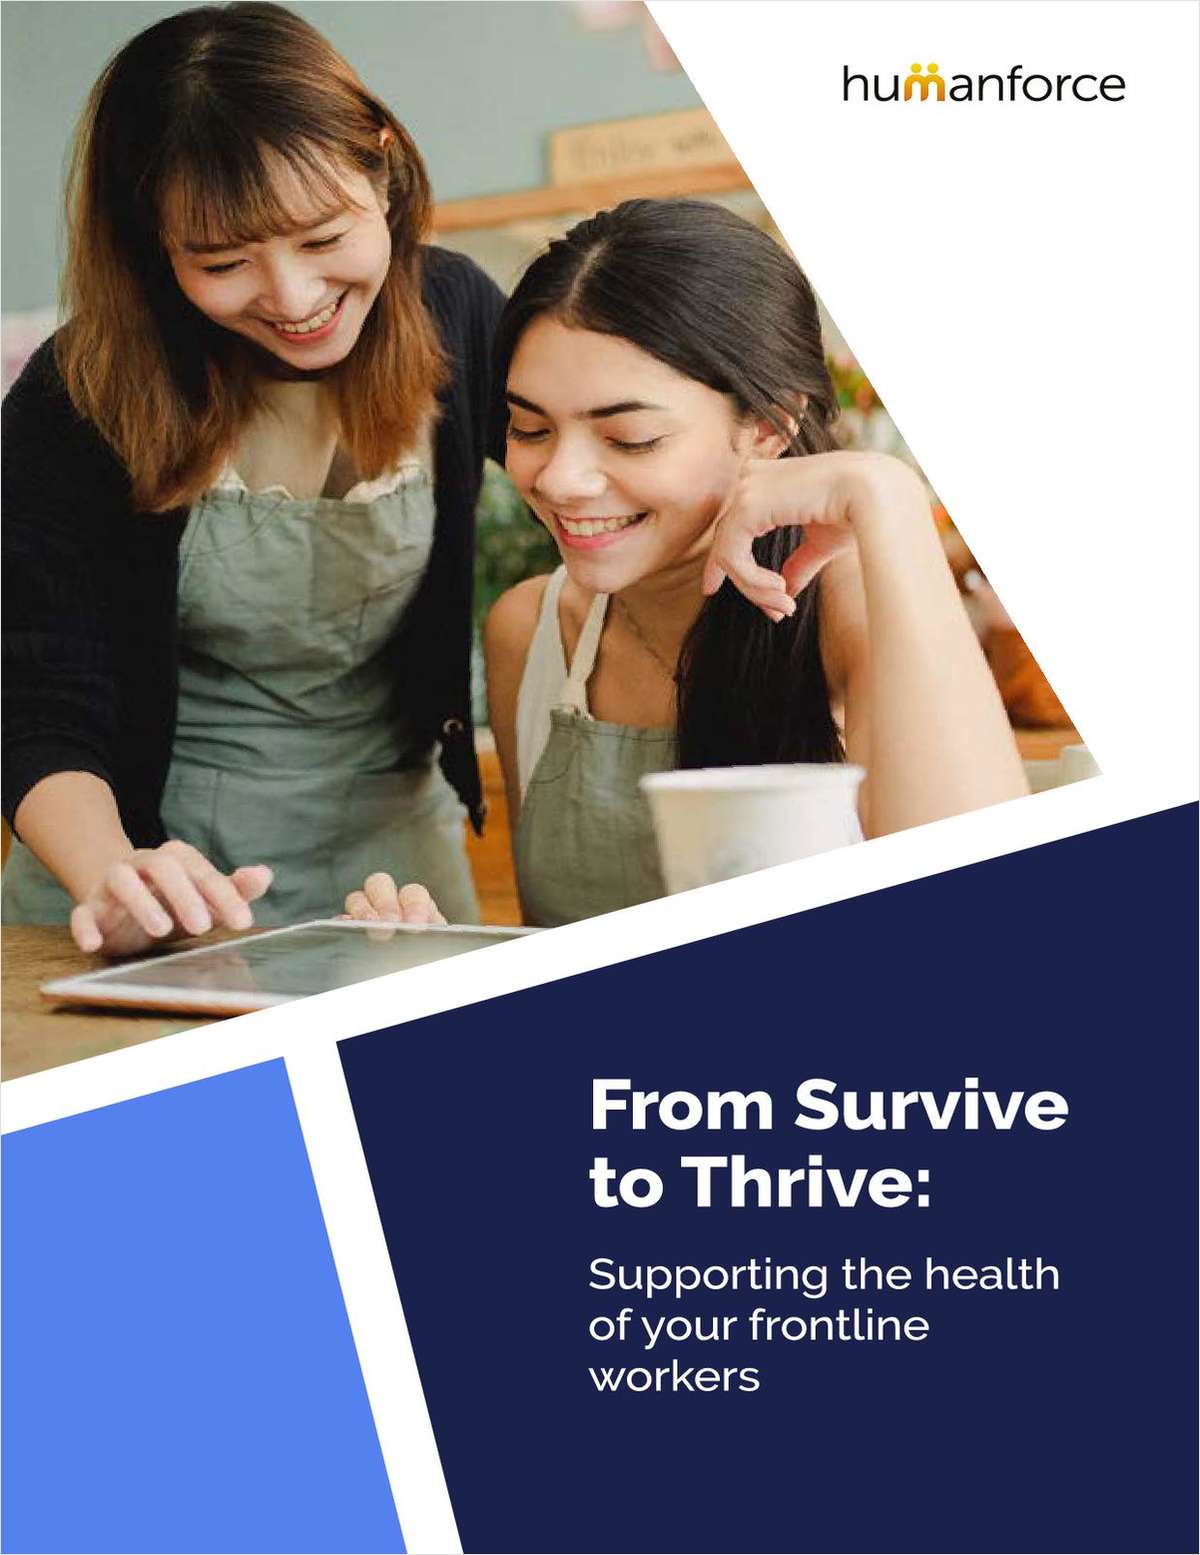 From Survive to Thrive: Supporting the health of your workers